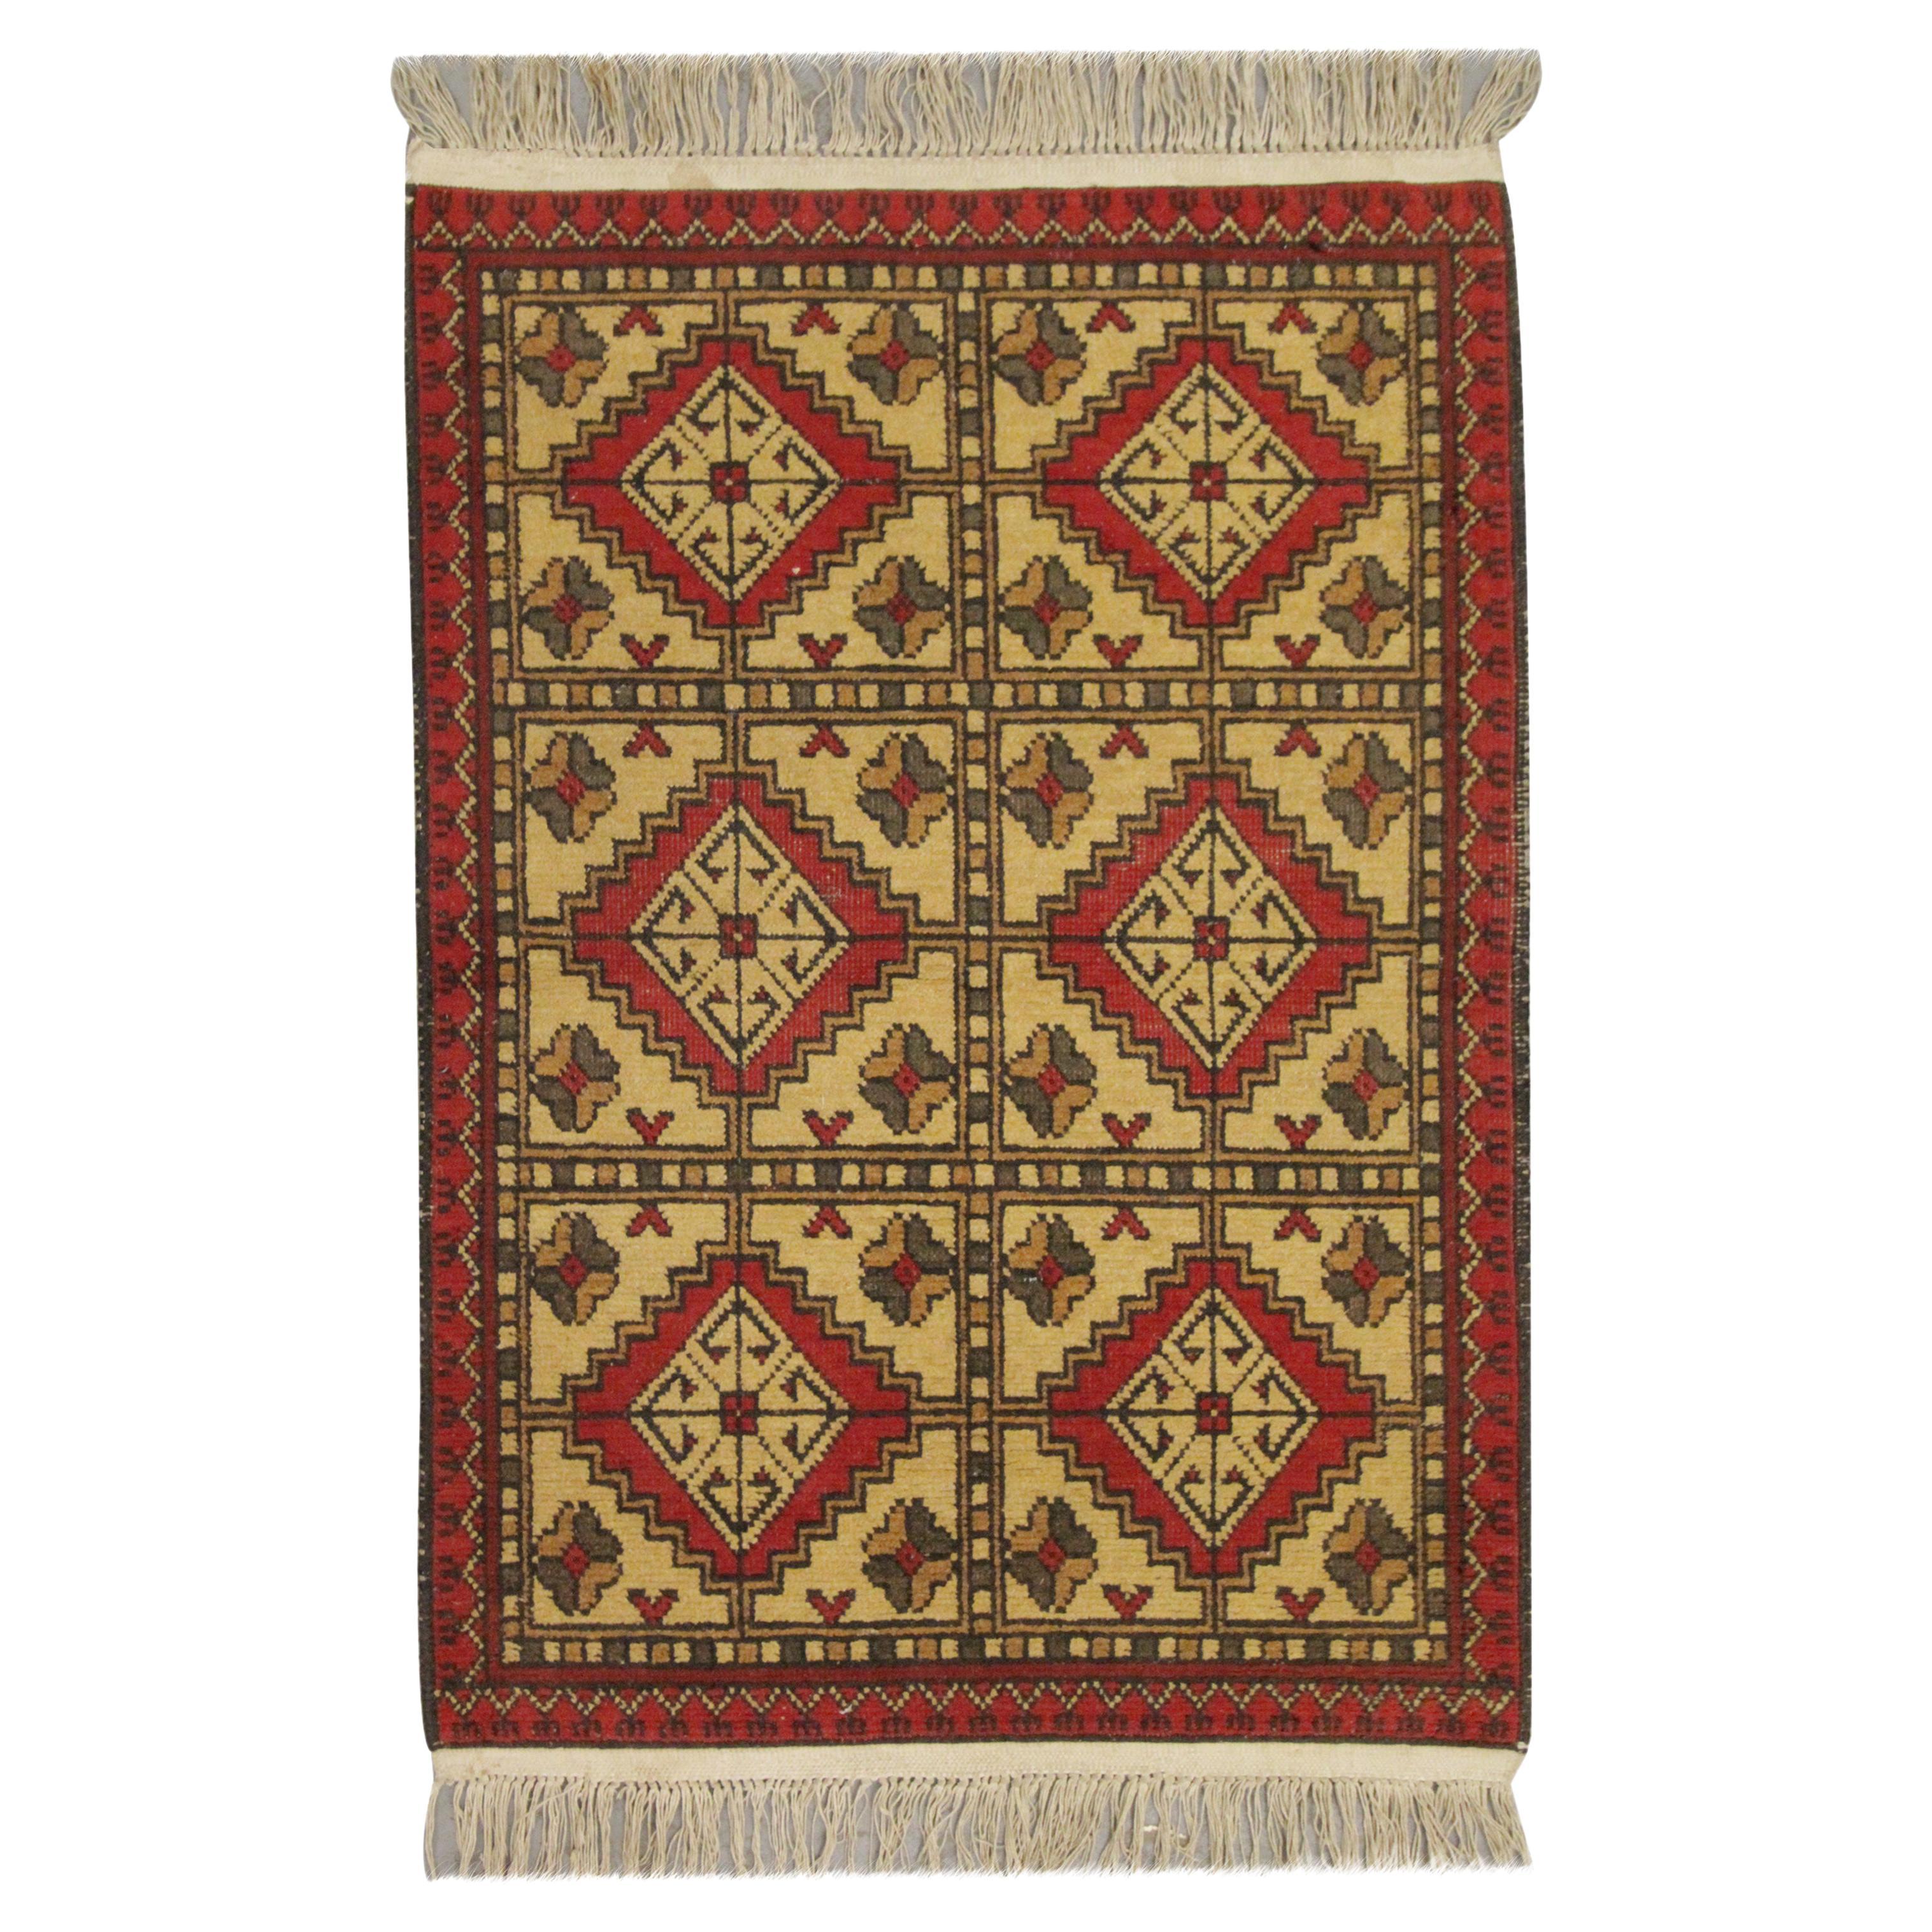 Geometric Area Rug Handwoven Oriental Living Room Carpet Red Gold  For Sale